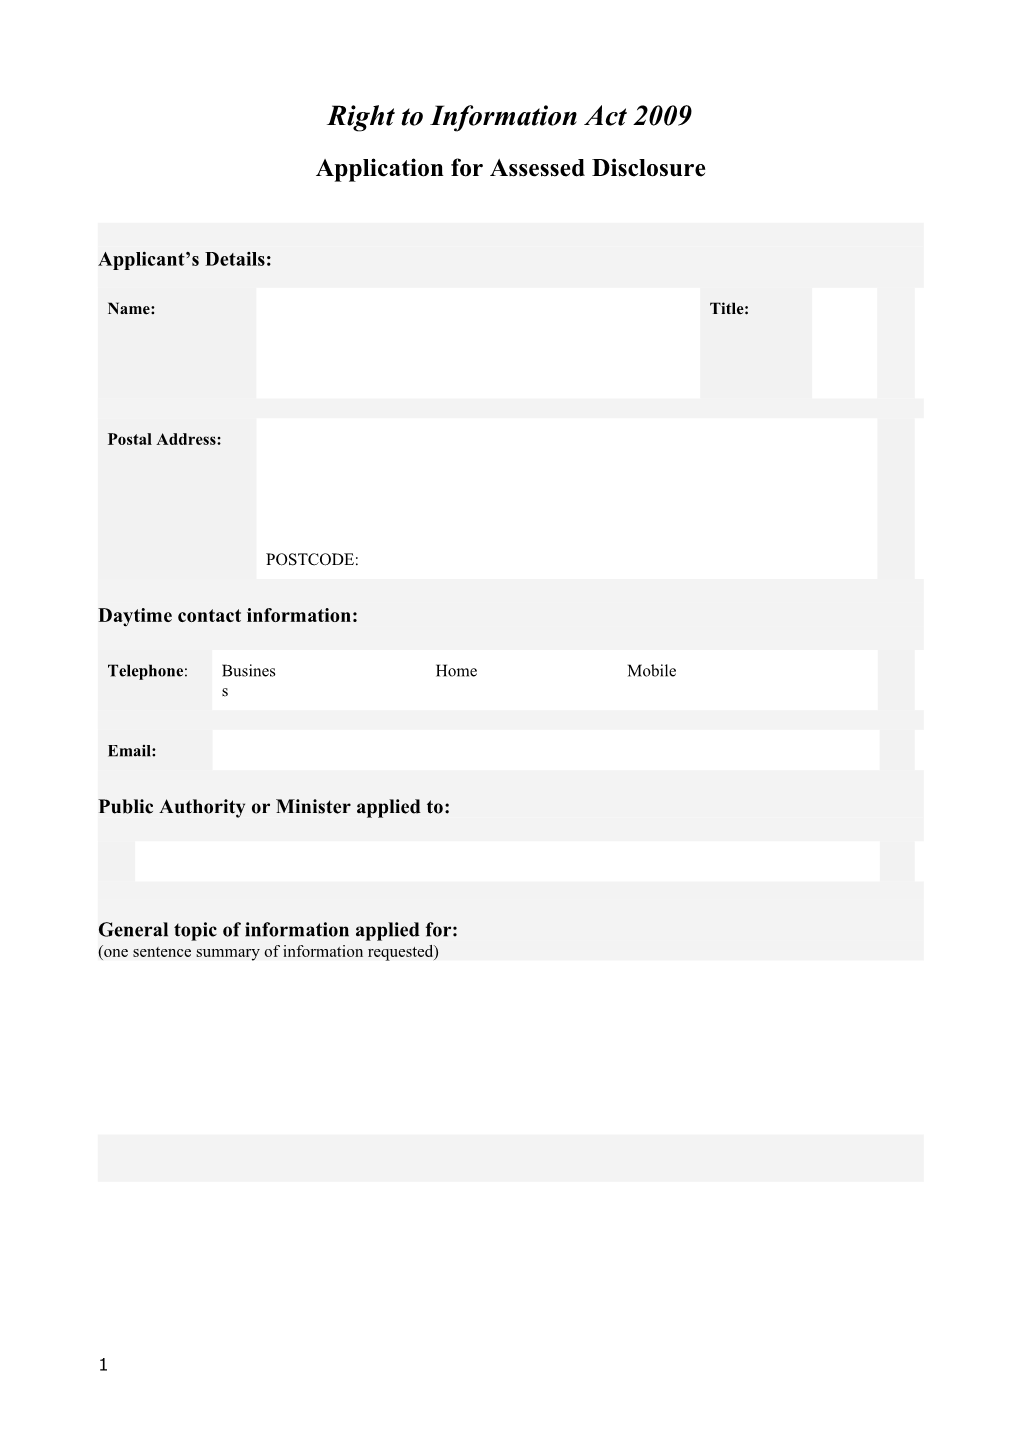 RTI Assessed Disclosure Application